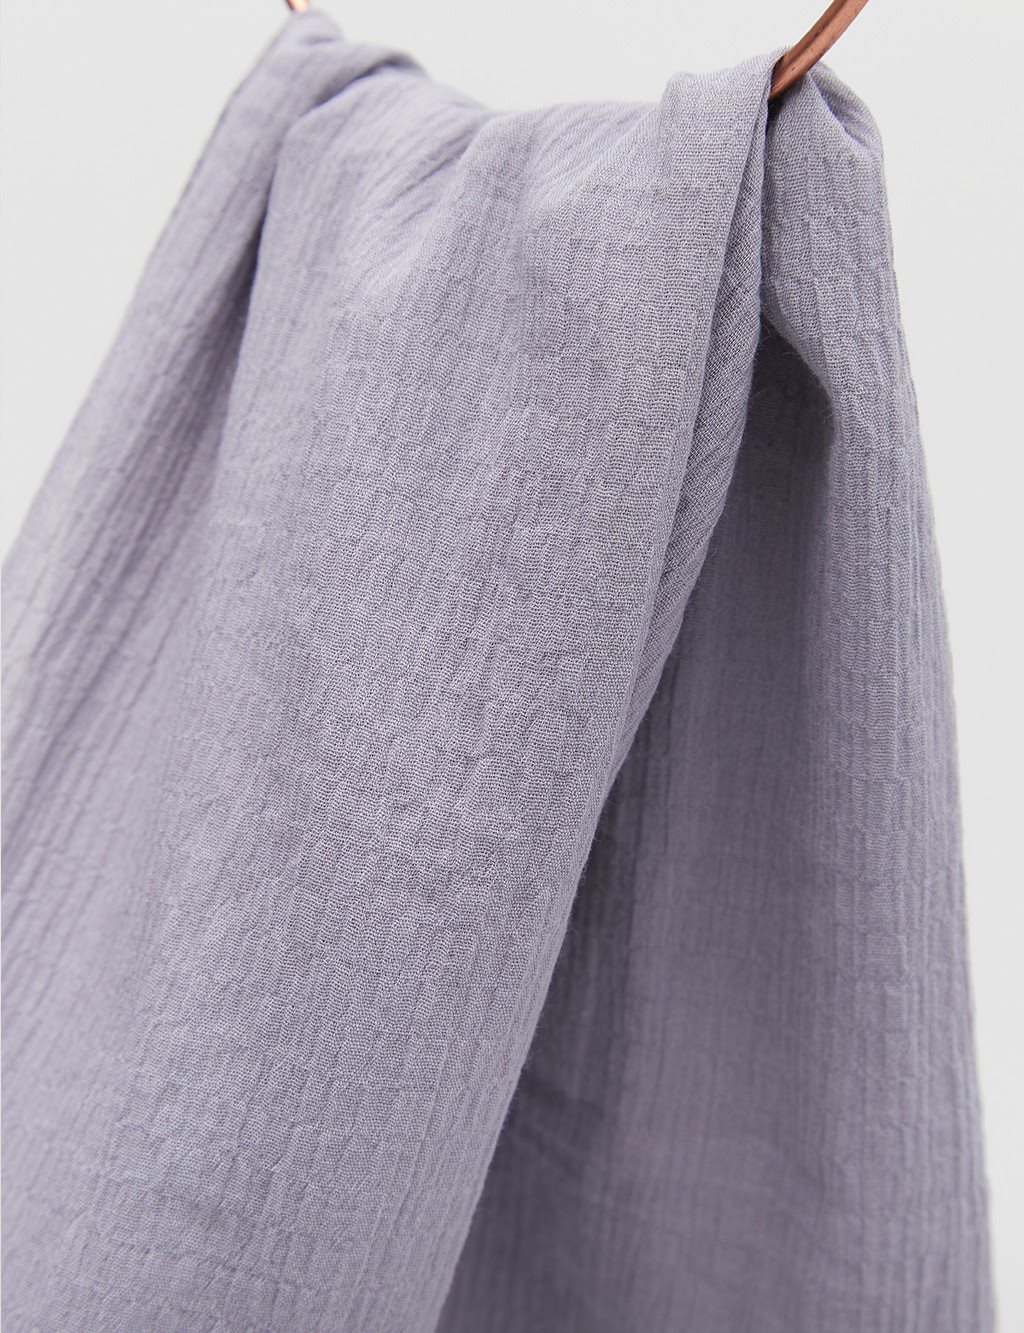 Solid Color Cotton Shawl Anthracite